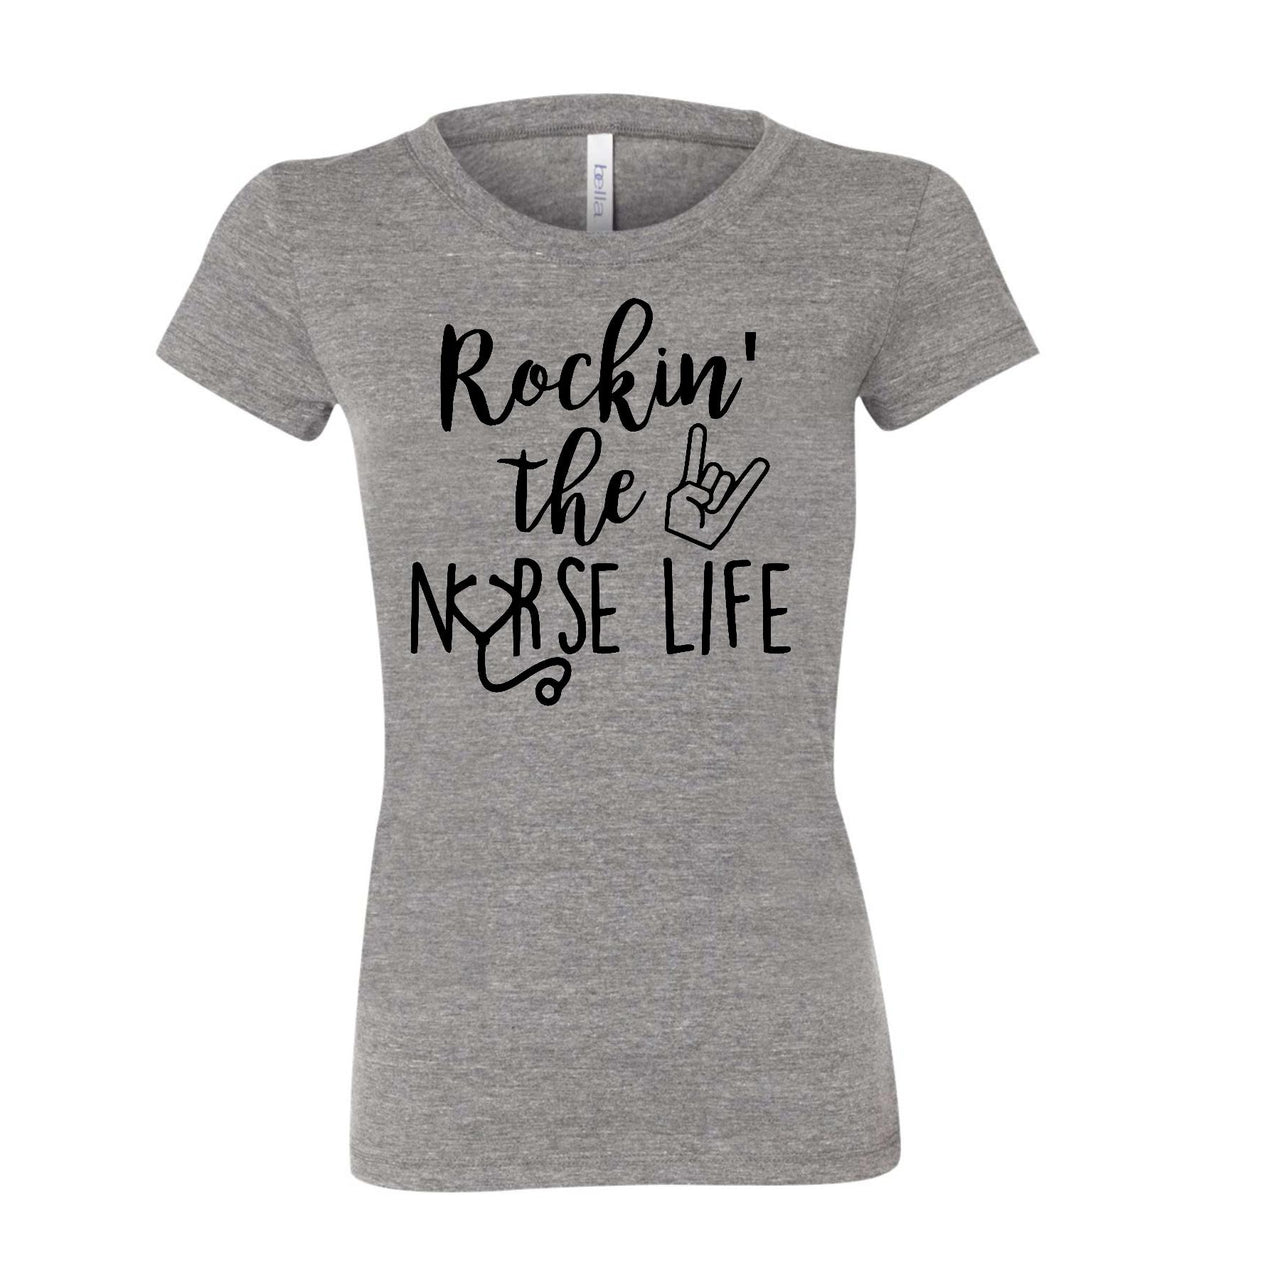 Rockin' the Nurse Life - Ladies Triblend Tee (Size 2xl Available)